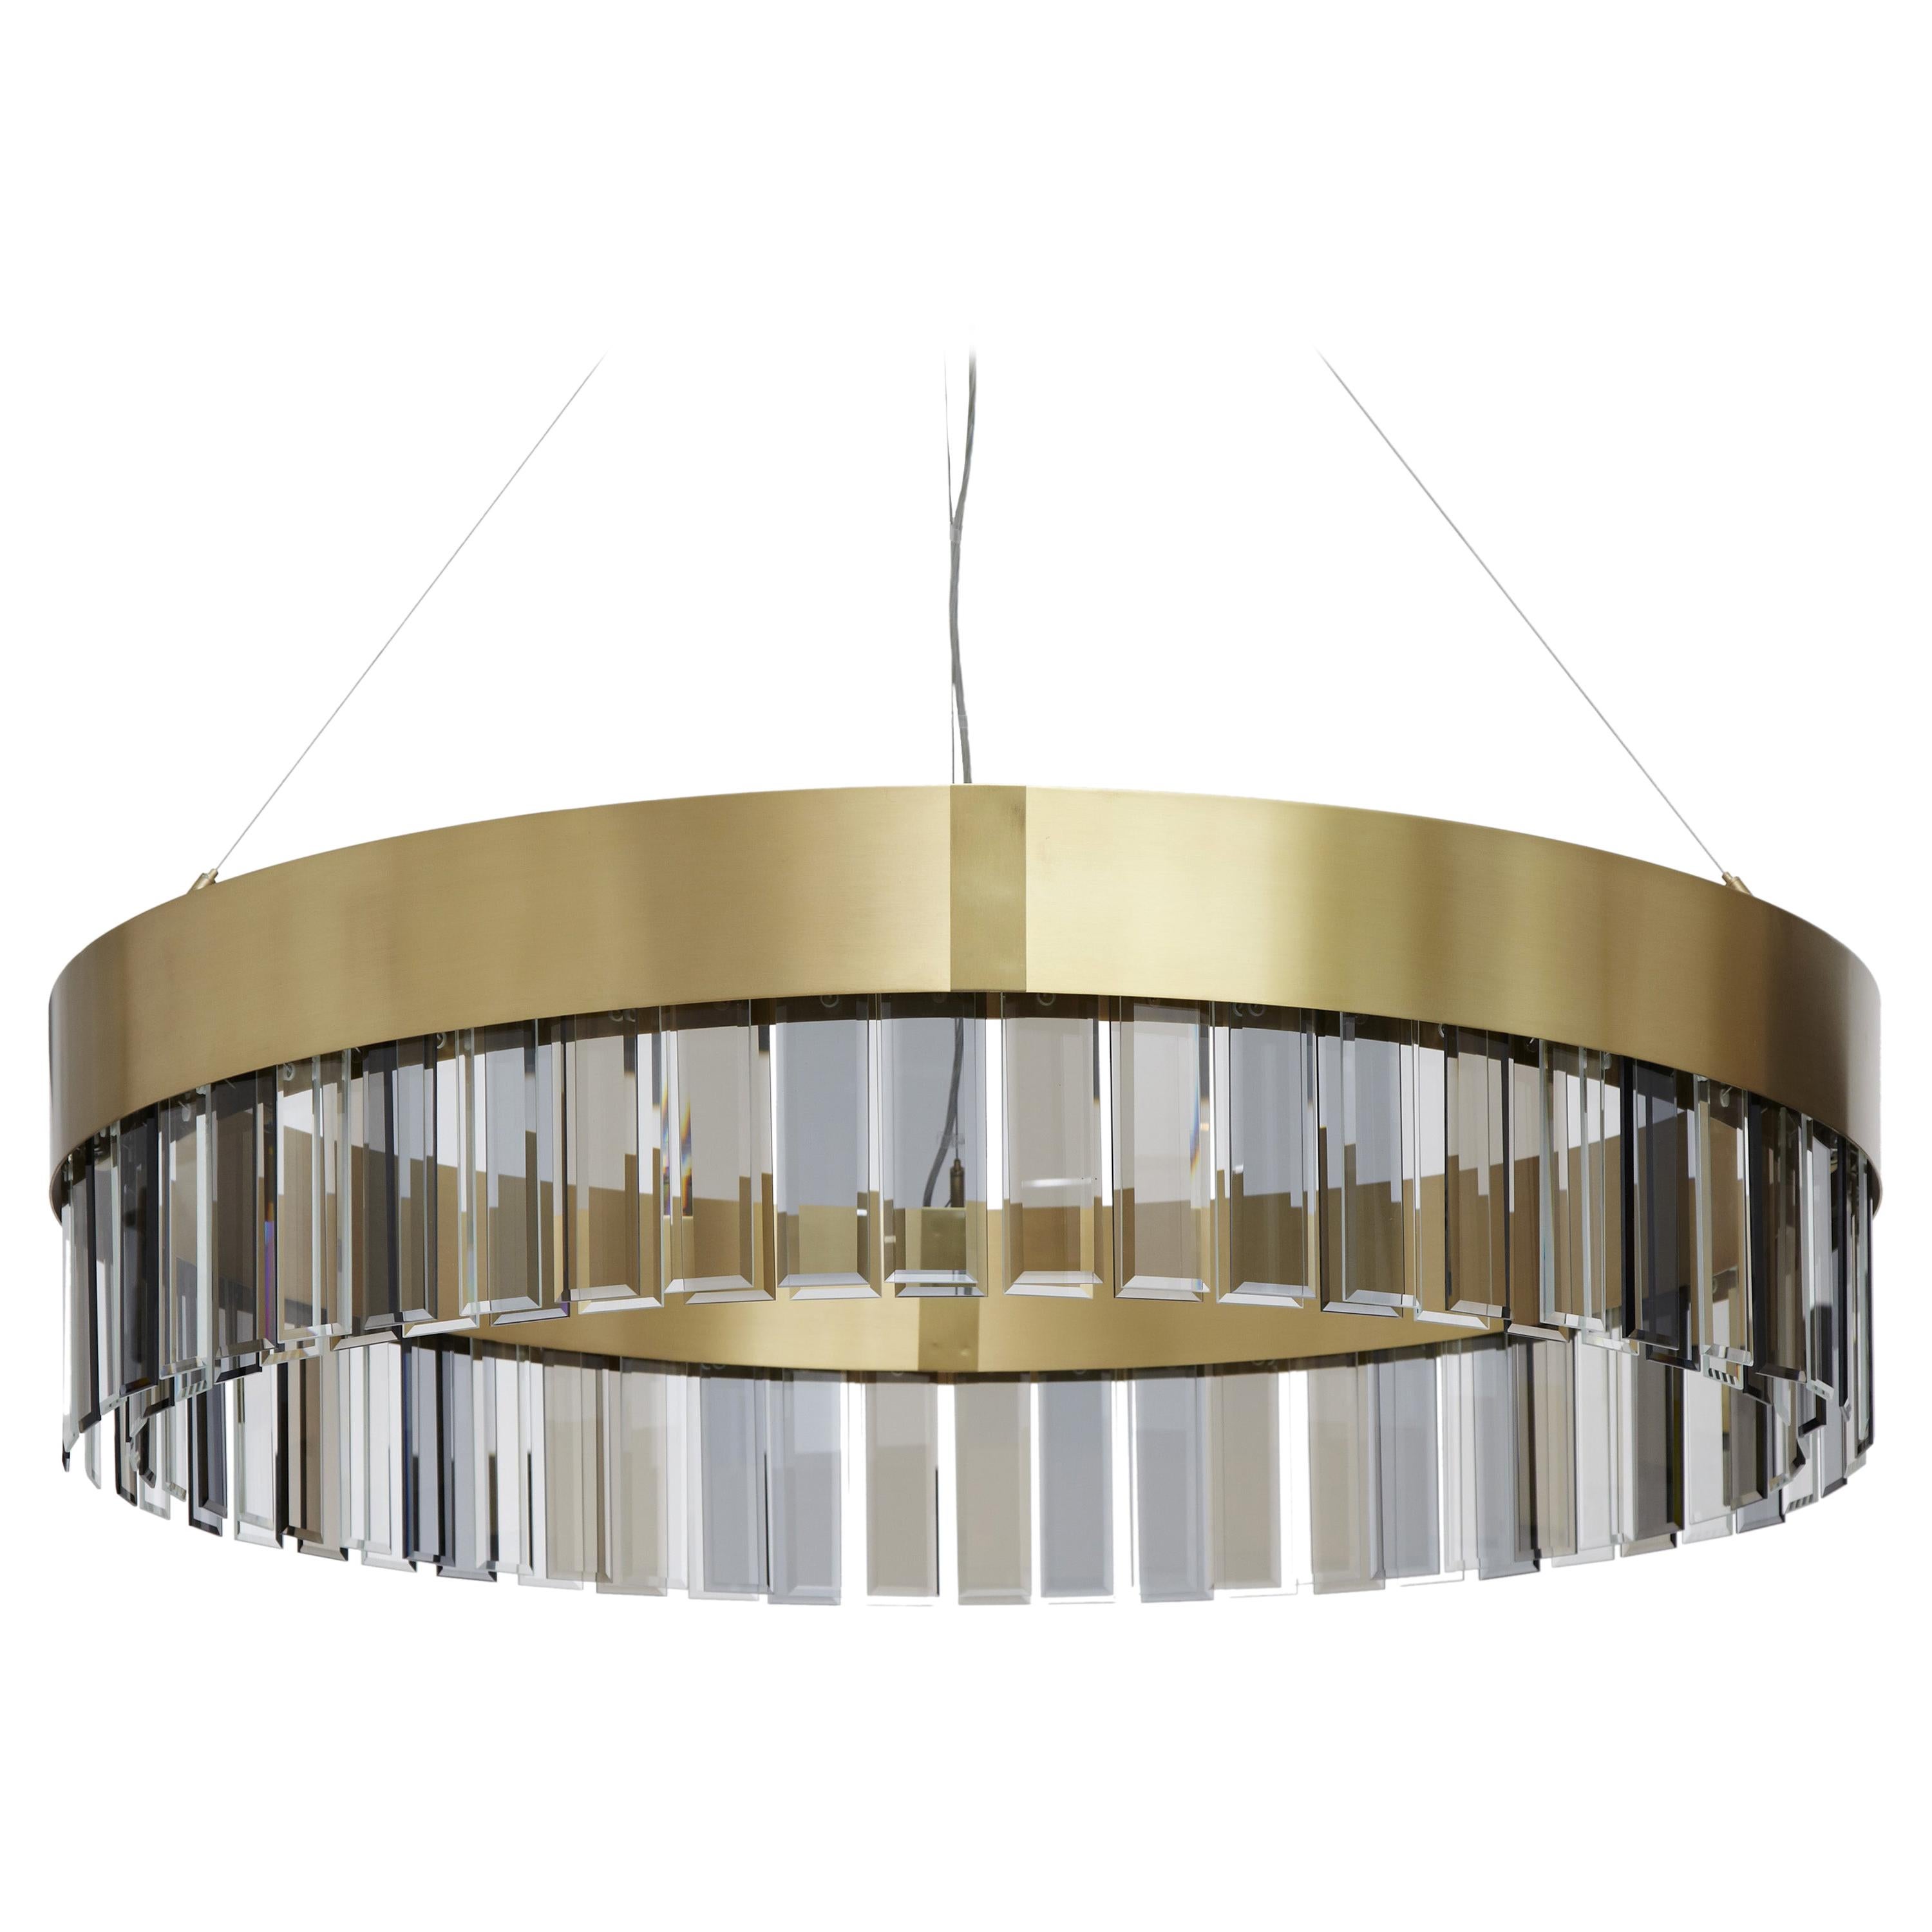 Solaris 1100 Pendant by CTO Lighting For Sale